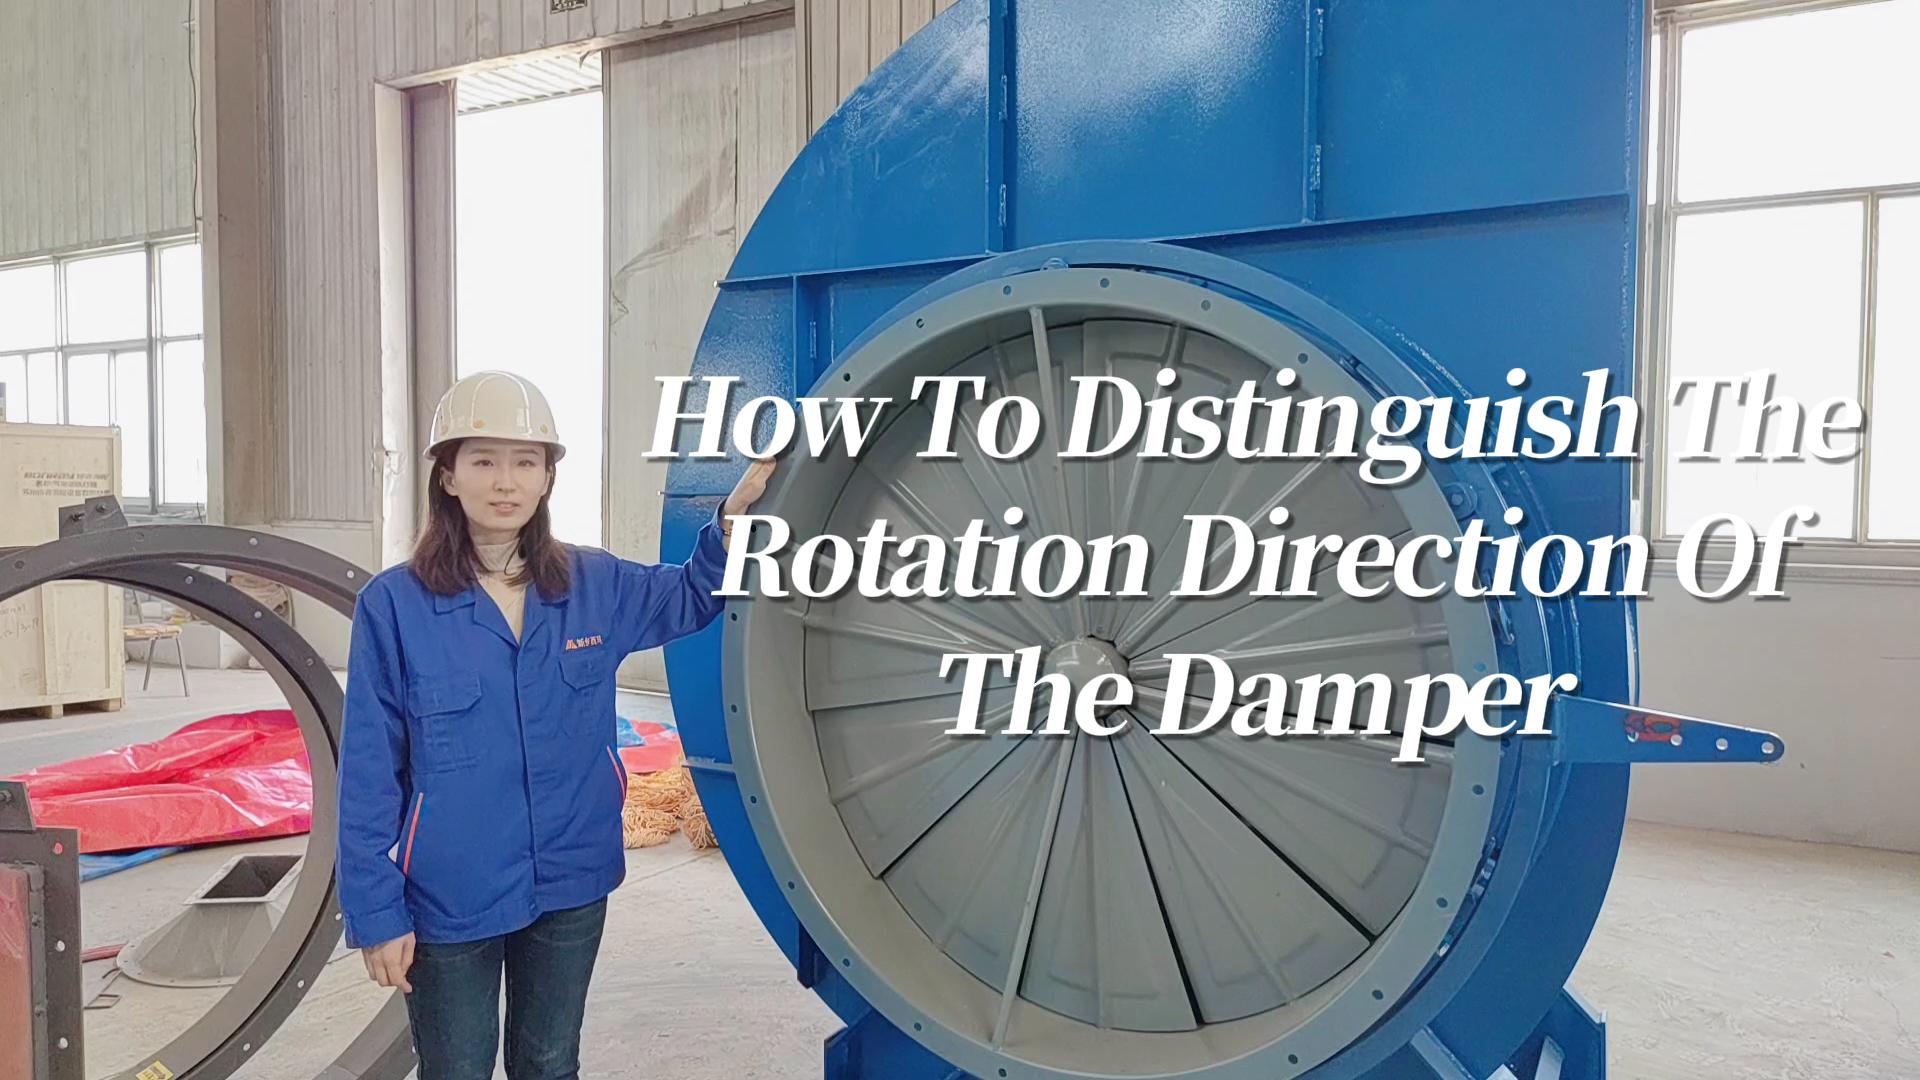 How To Distinguish The Rotation Direction Of The Damper